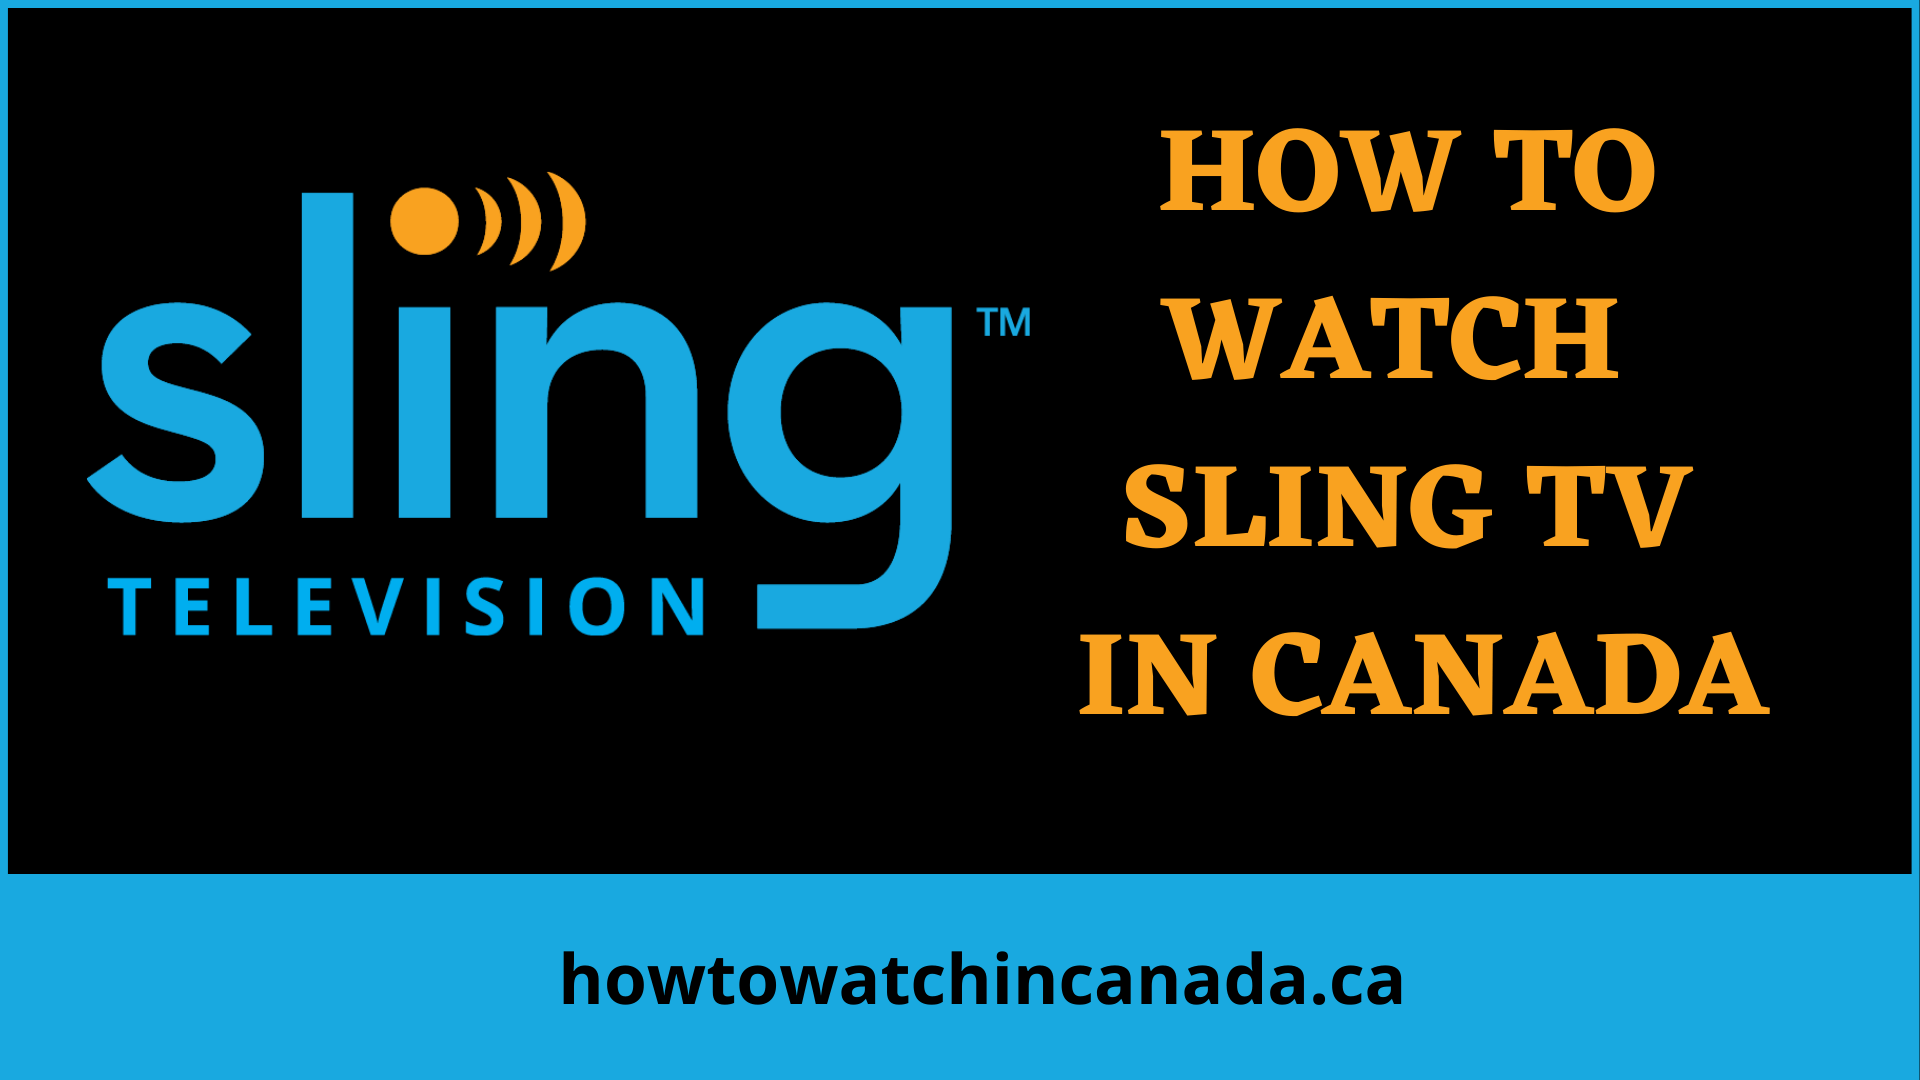 sling-feat-how-to-watch-in-canada